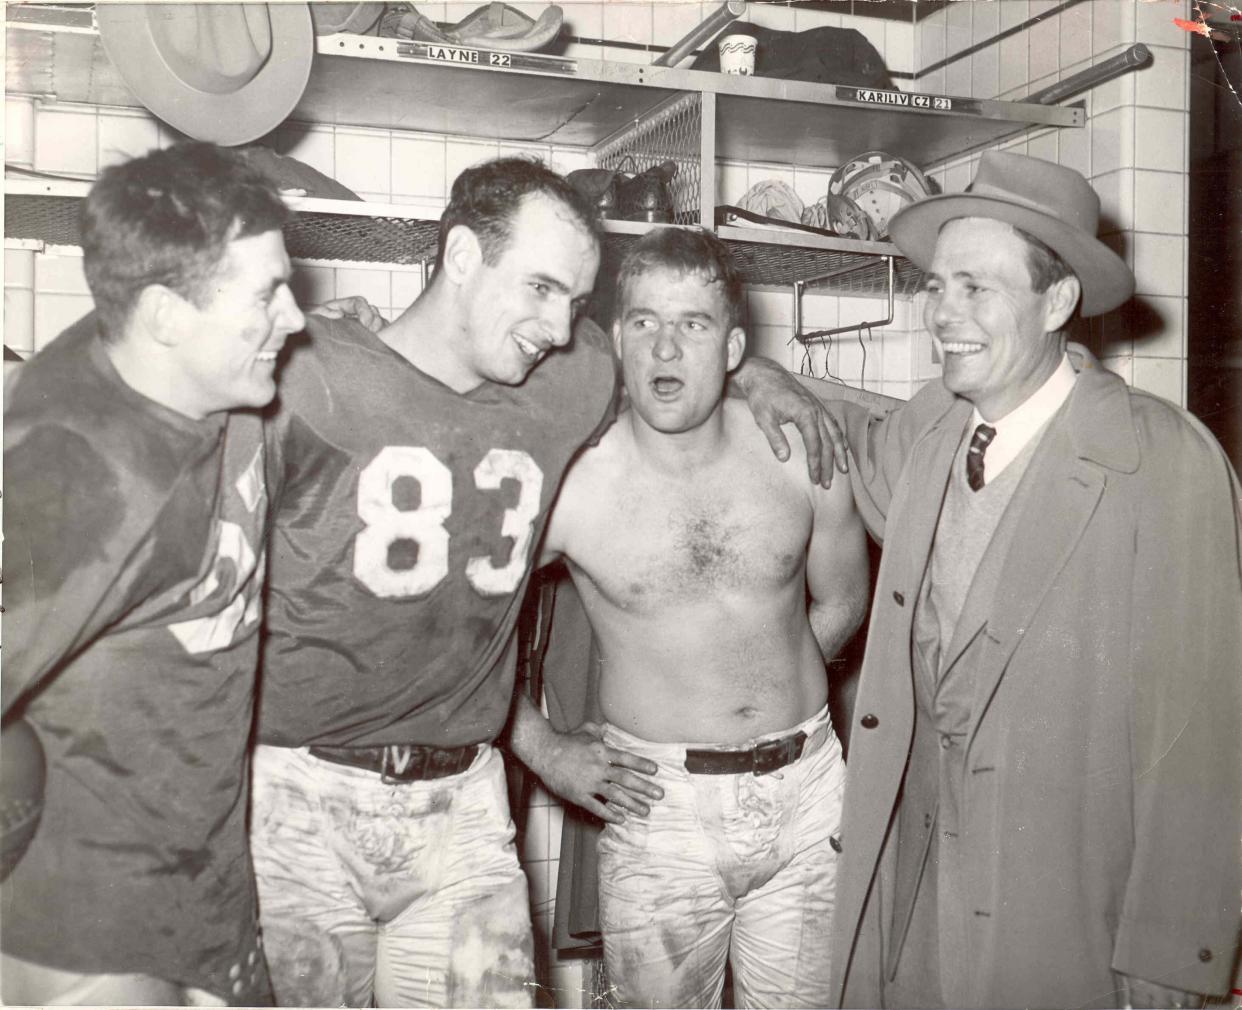 Left to right in Briggs Stadium following the 1953 championship victory are Doak Walker, Jim Doran, Bobby Layne and head coach Buddy Parker. The Lions were down 16-10 in the closing minutes and Layne marched the offense 80 yards to victory when he hit Doran for a 33-yard touchdown pass.